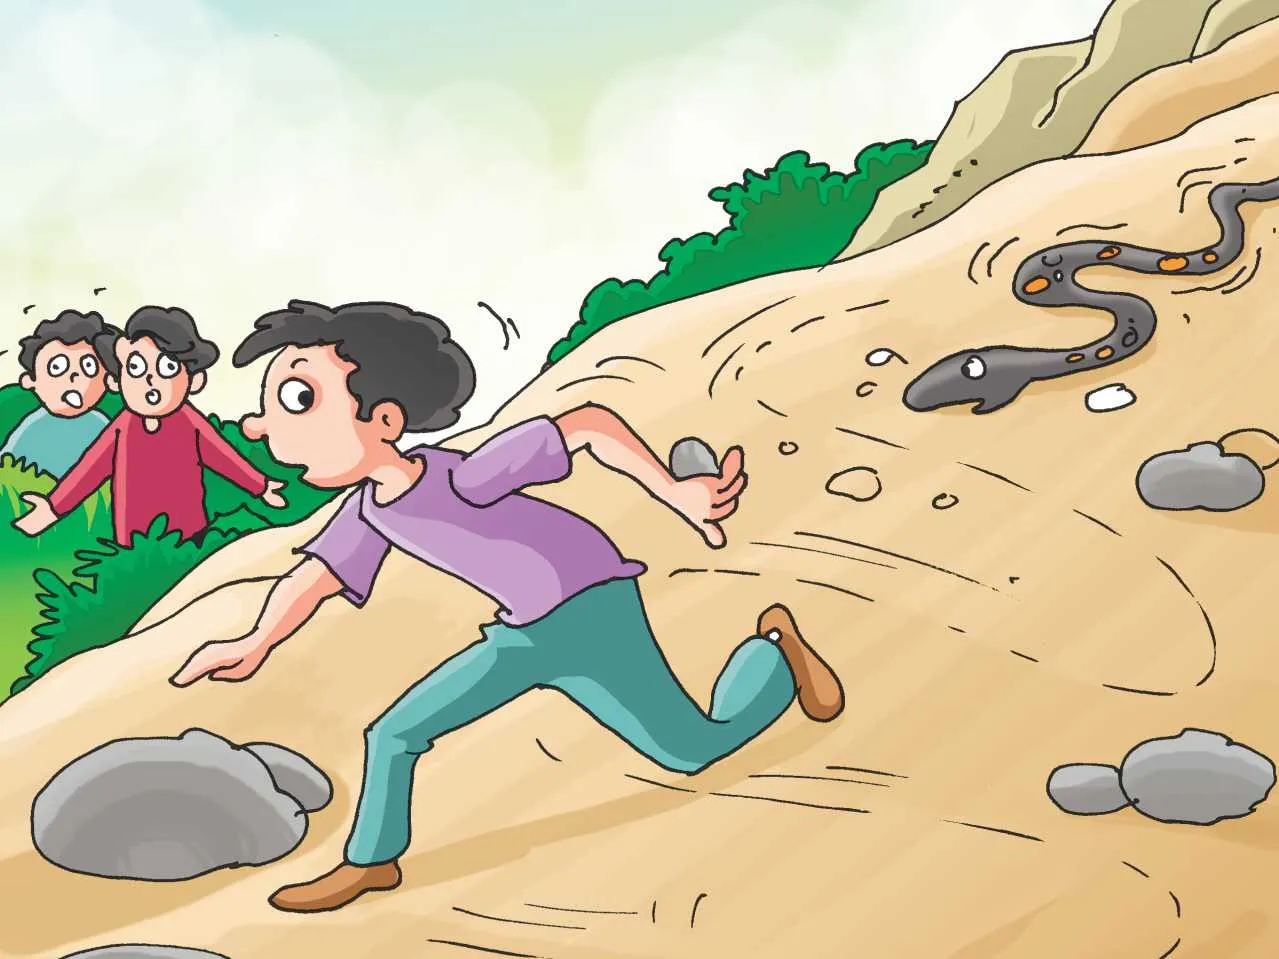 Boy chased by snake cartoon image